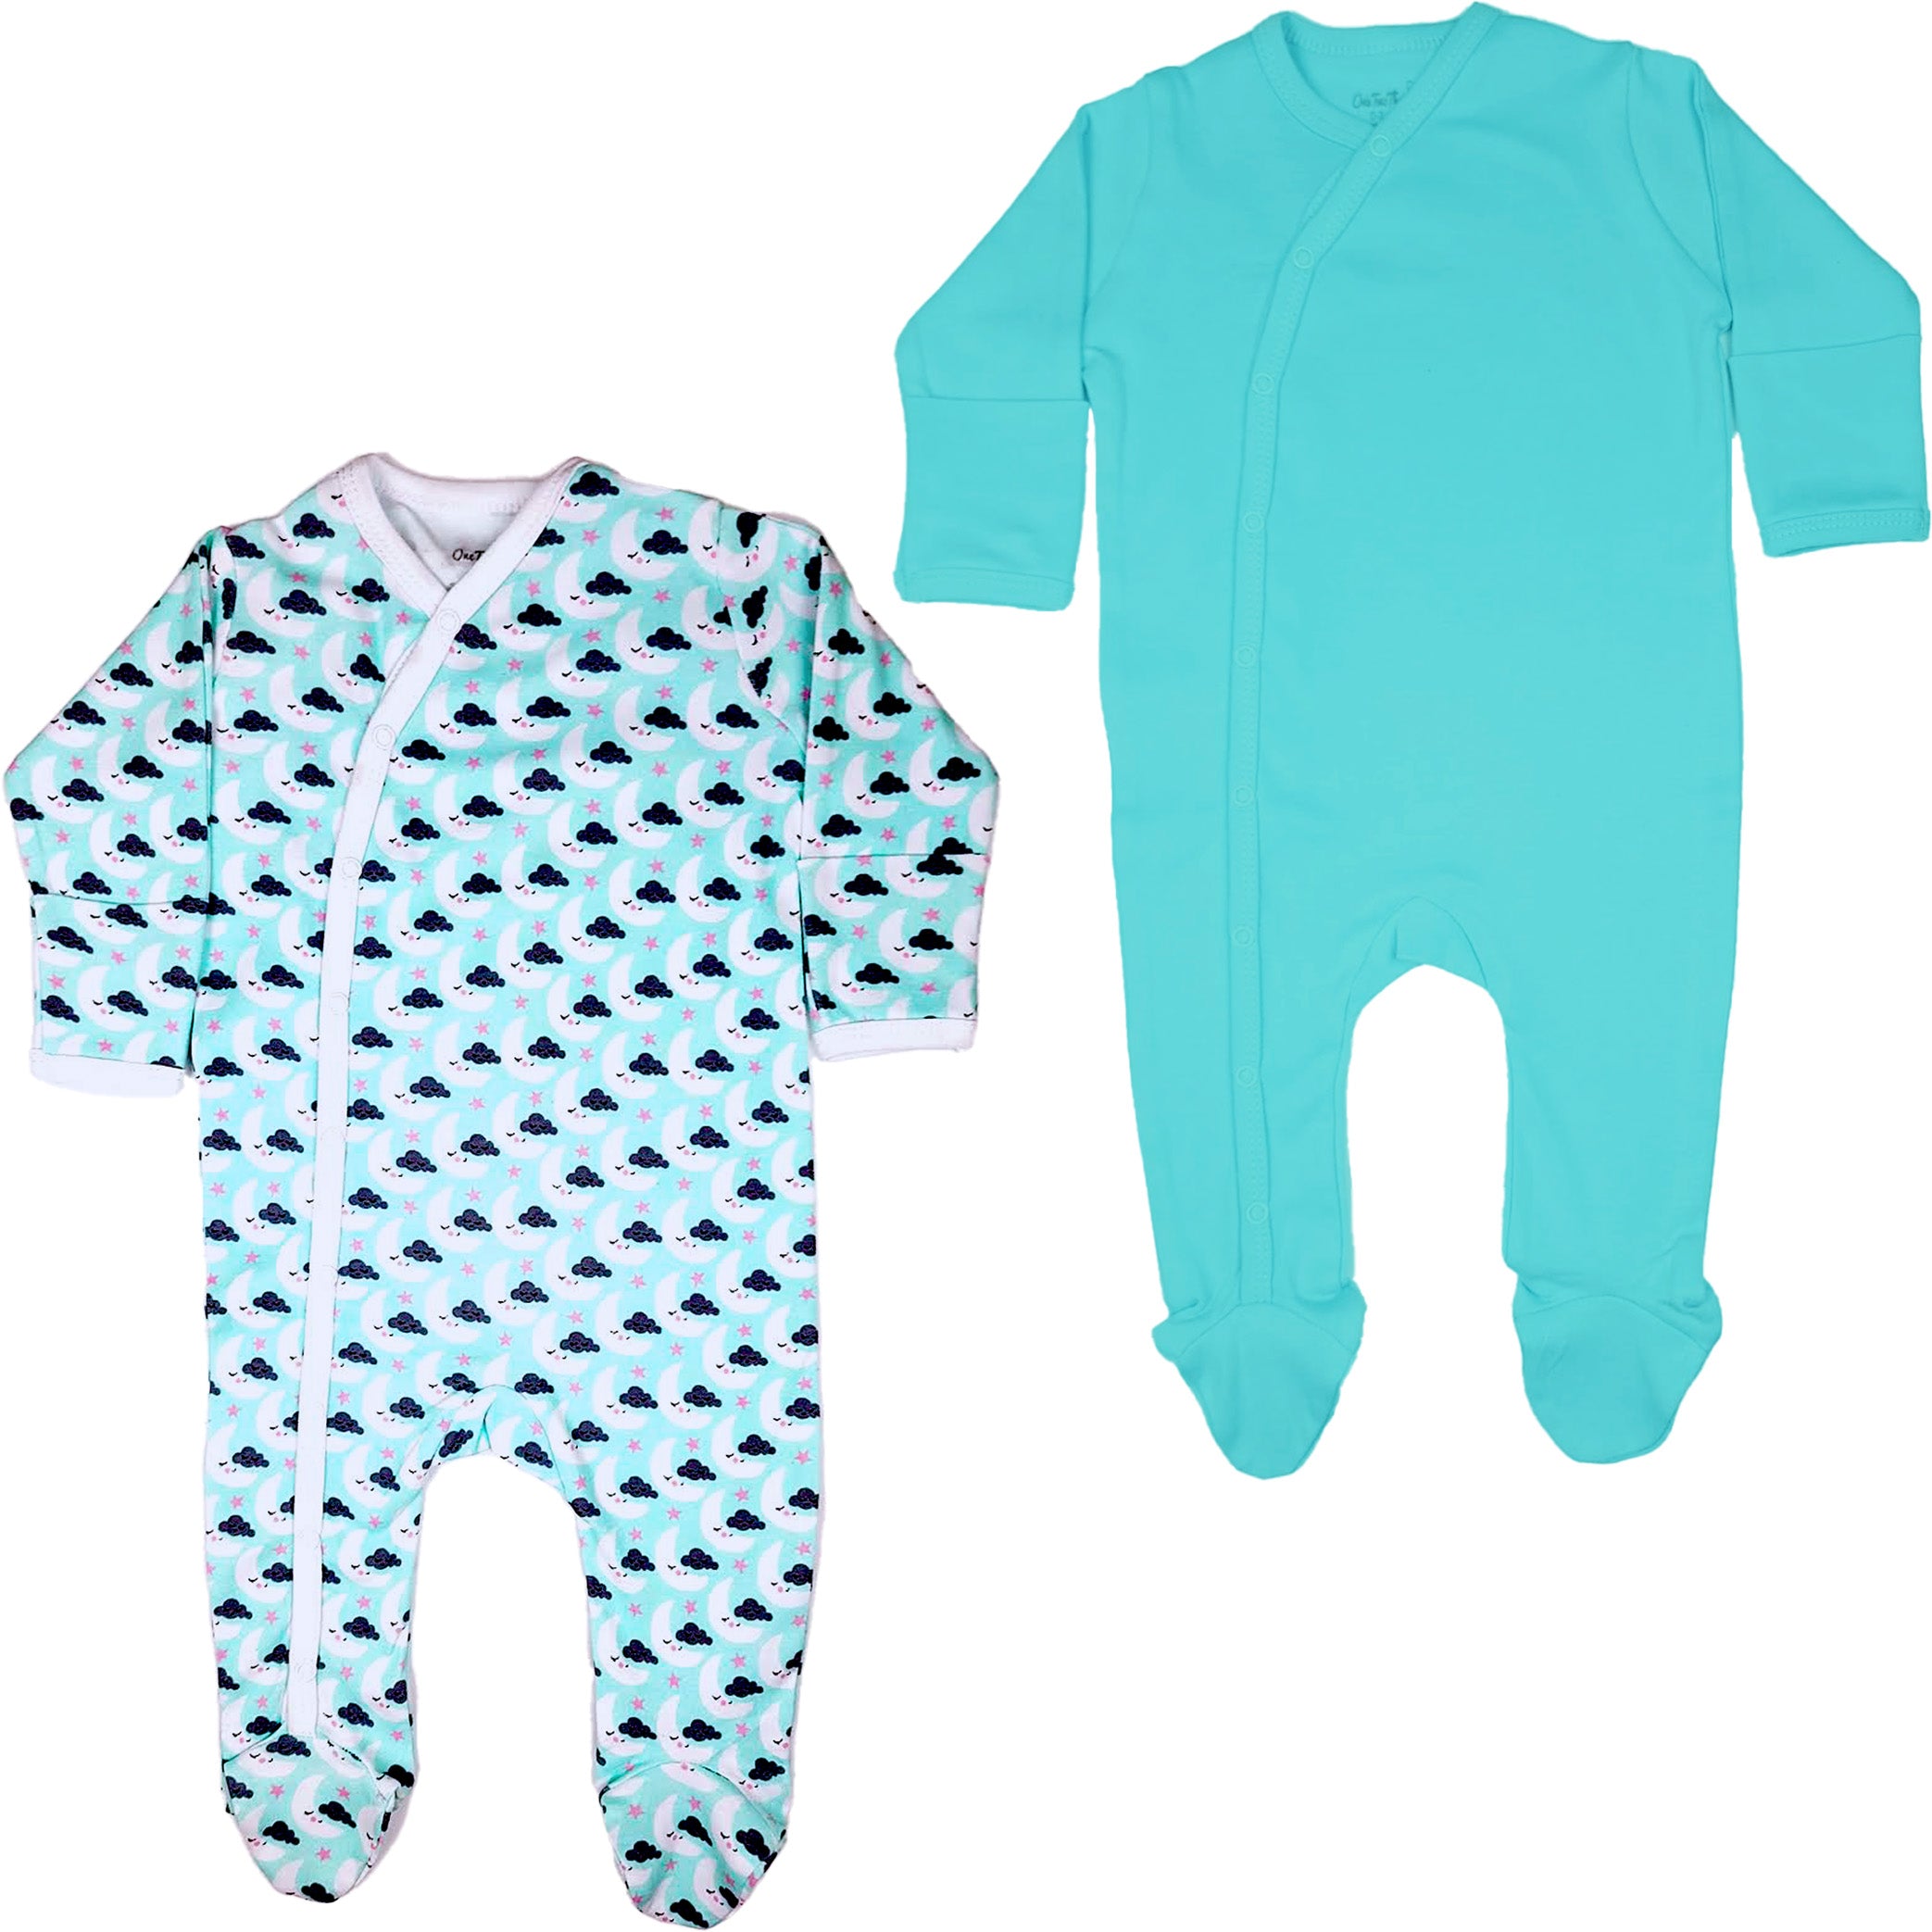 123 Bear 2 Pack Footed Sleep-N-Play PJs Rompers Jumpsuit100% Cotton with Mitten Cuffs Unisex Boys Girls